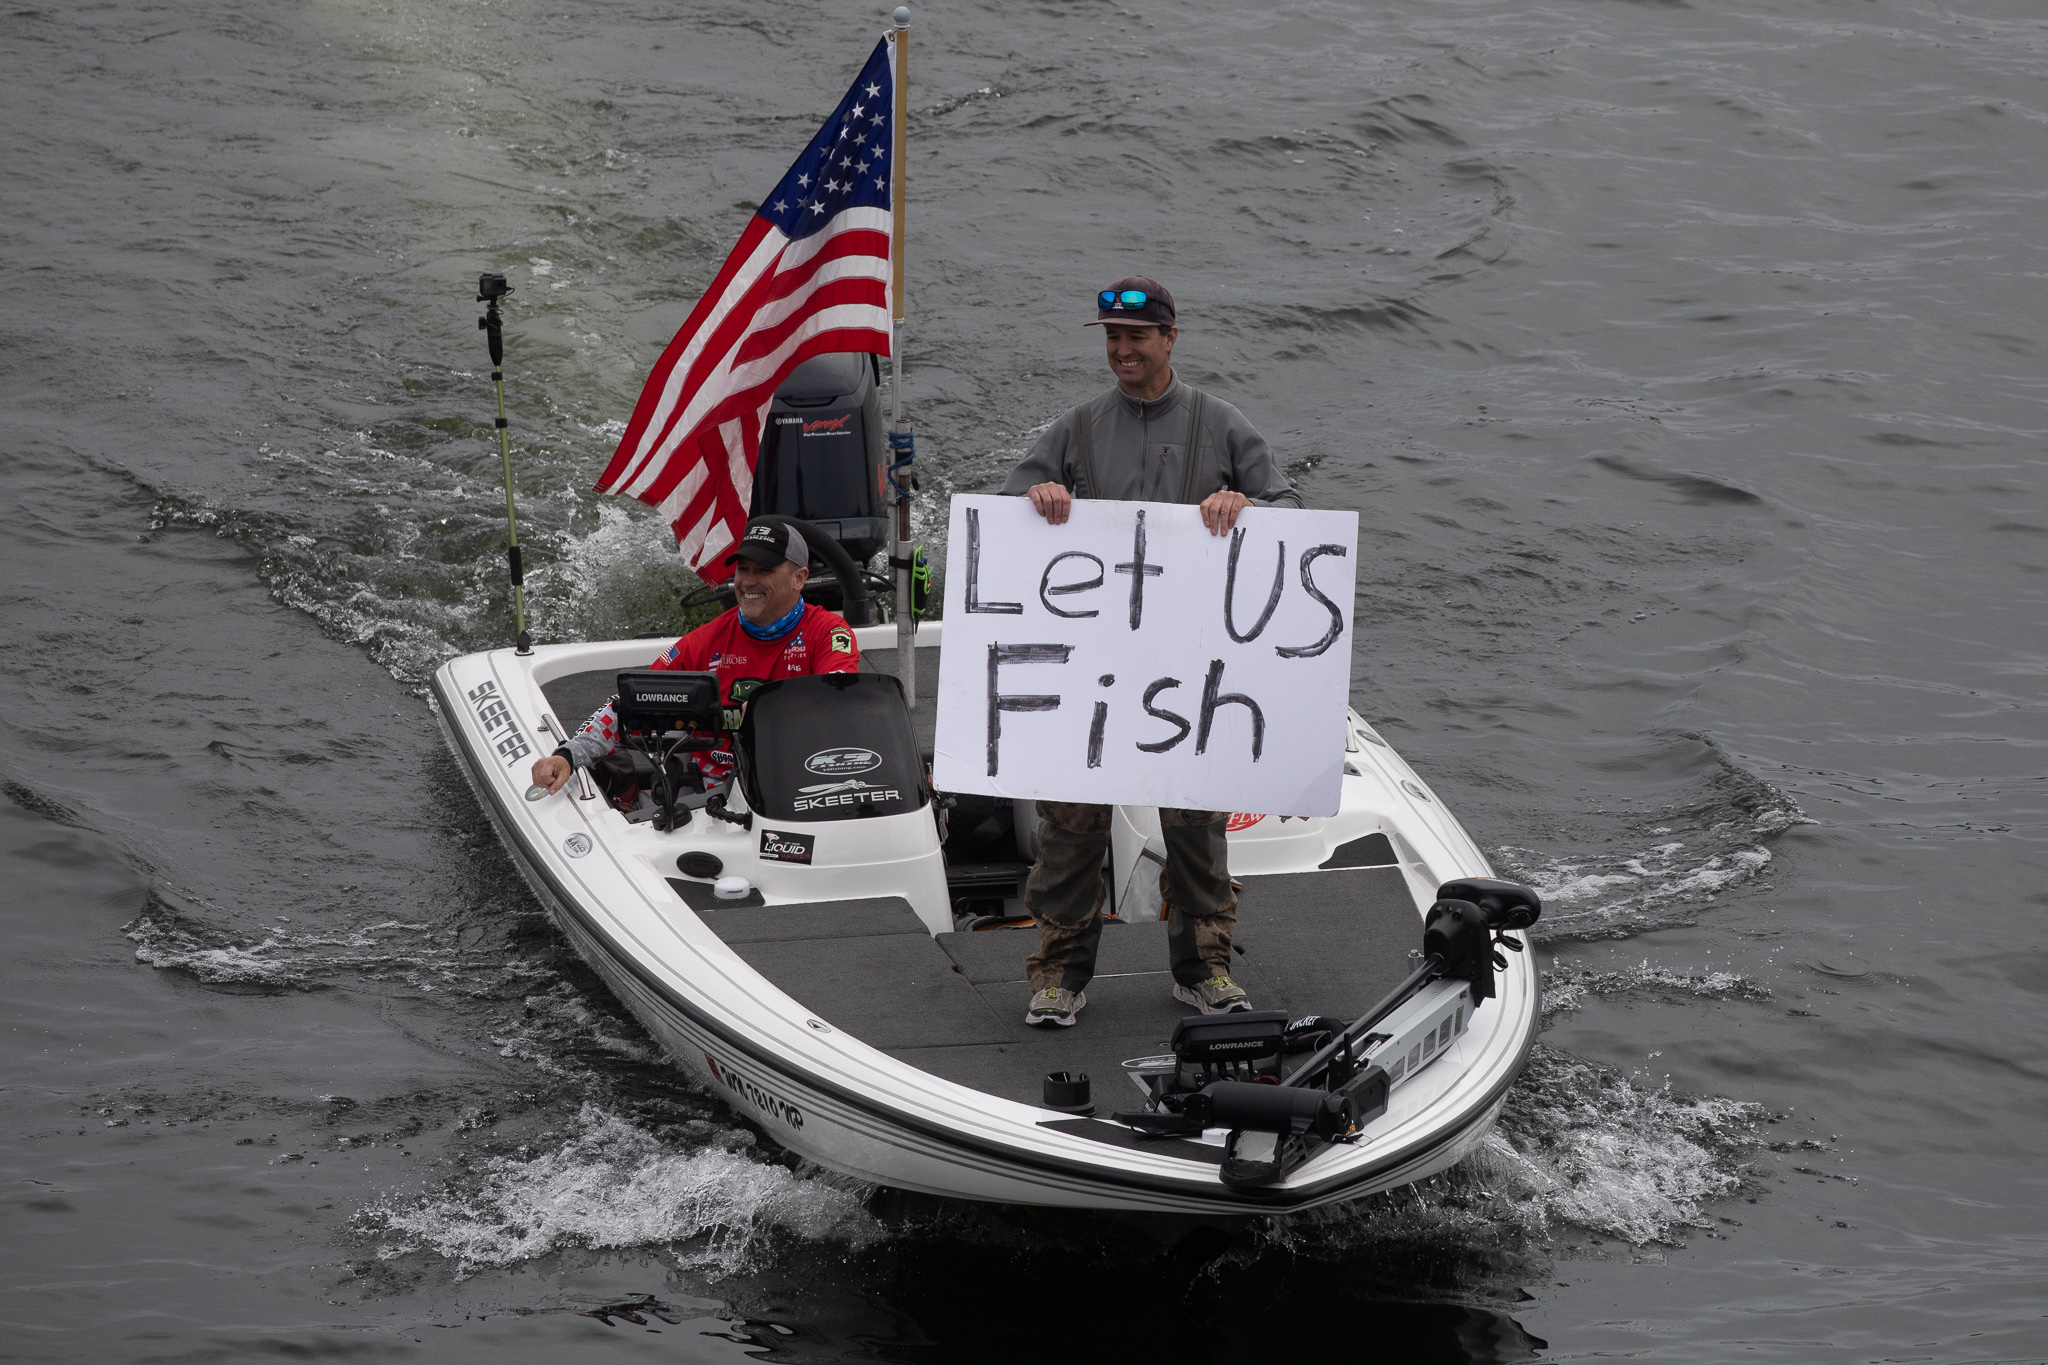 A man stands up in a boat in the water with a sign that says let us fish